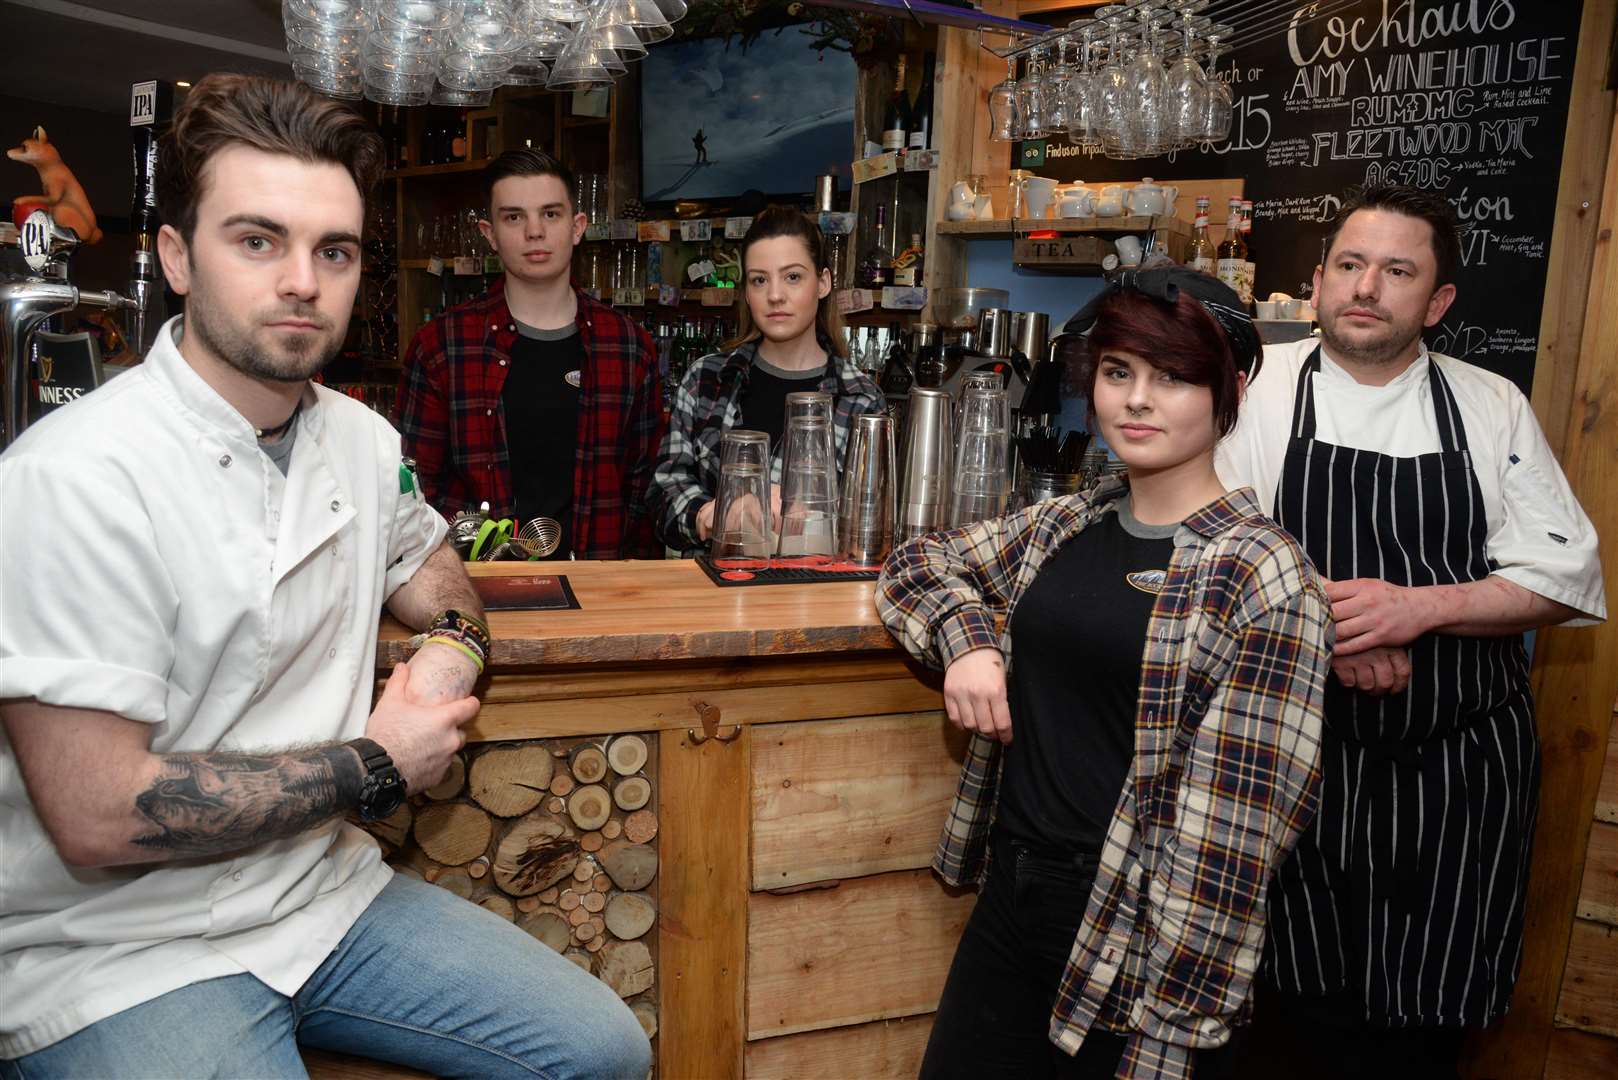 Aaron Neil and his staff at the Rock Lodge Restaurant